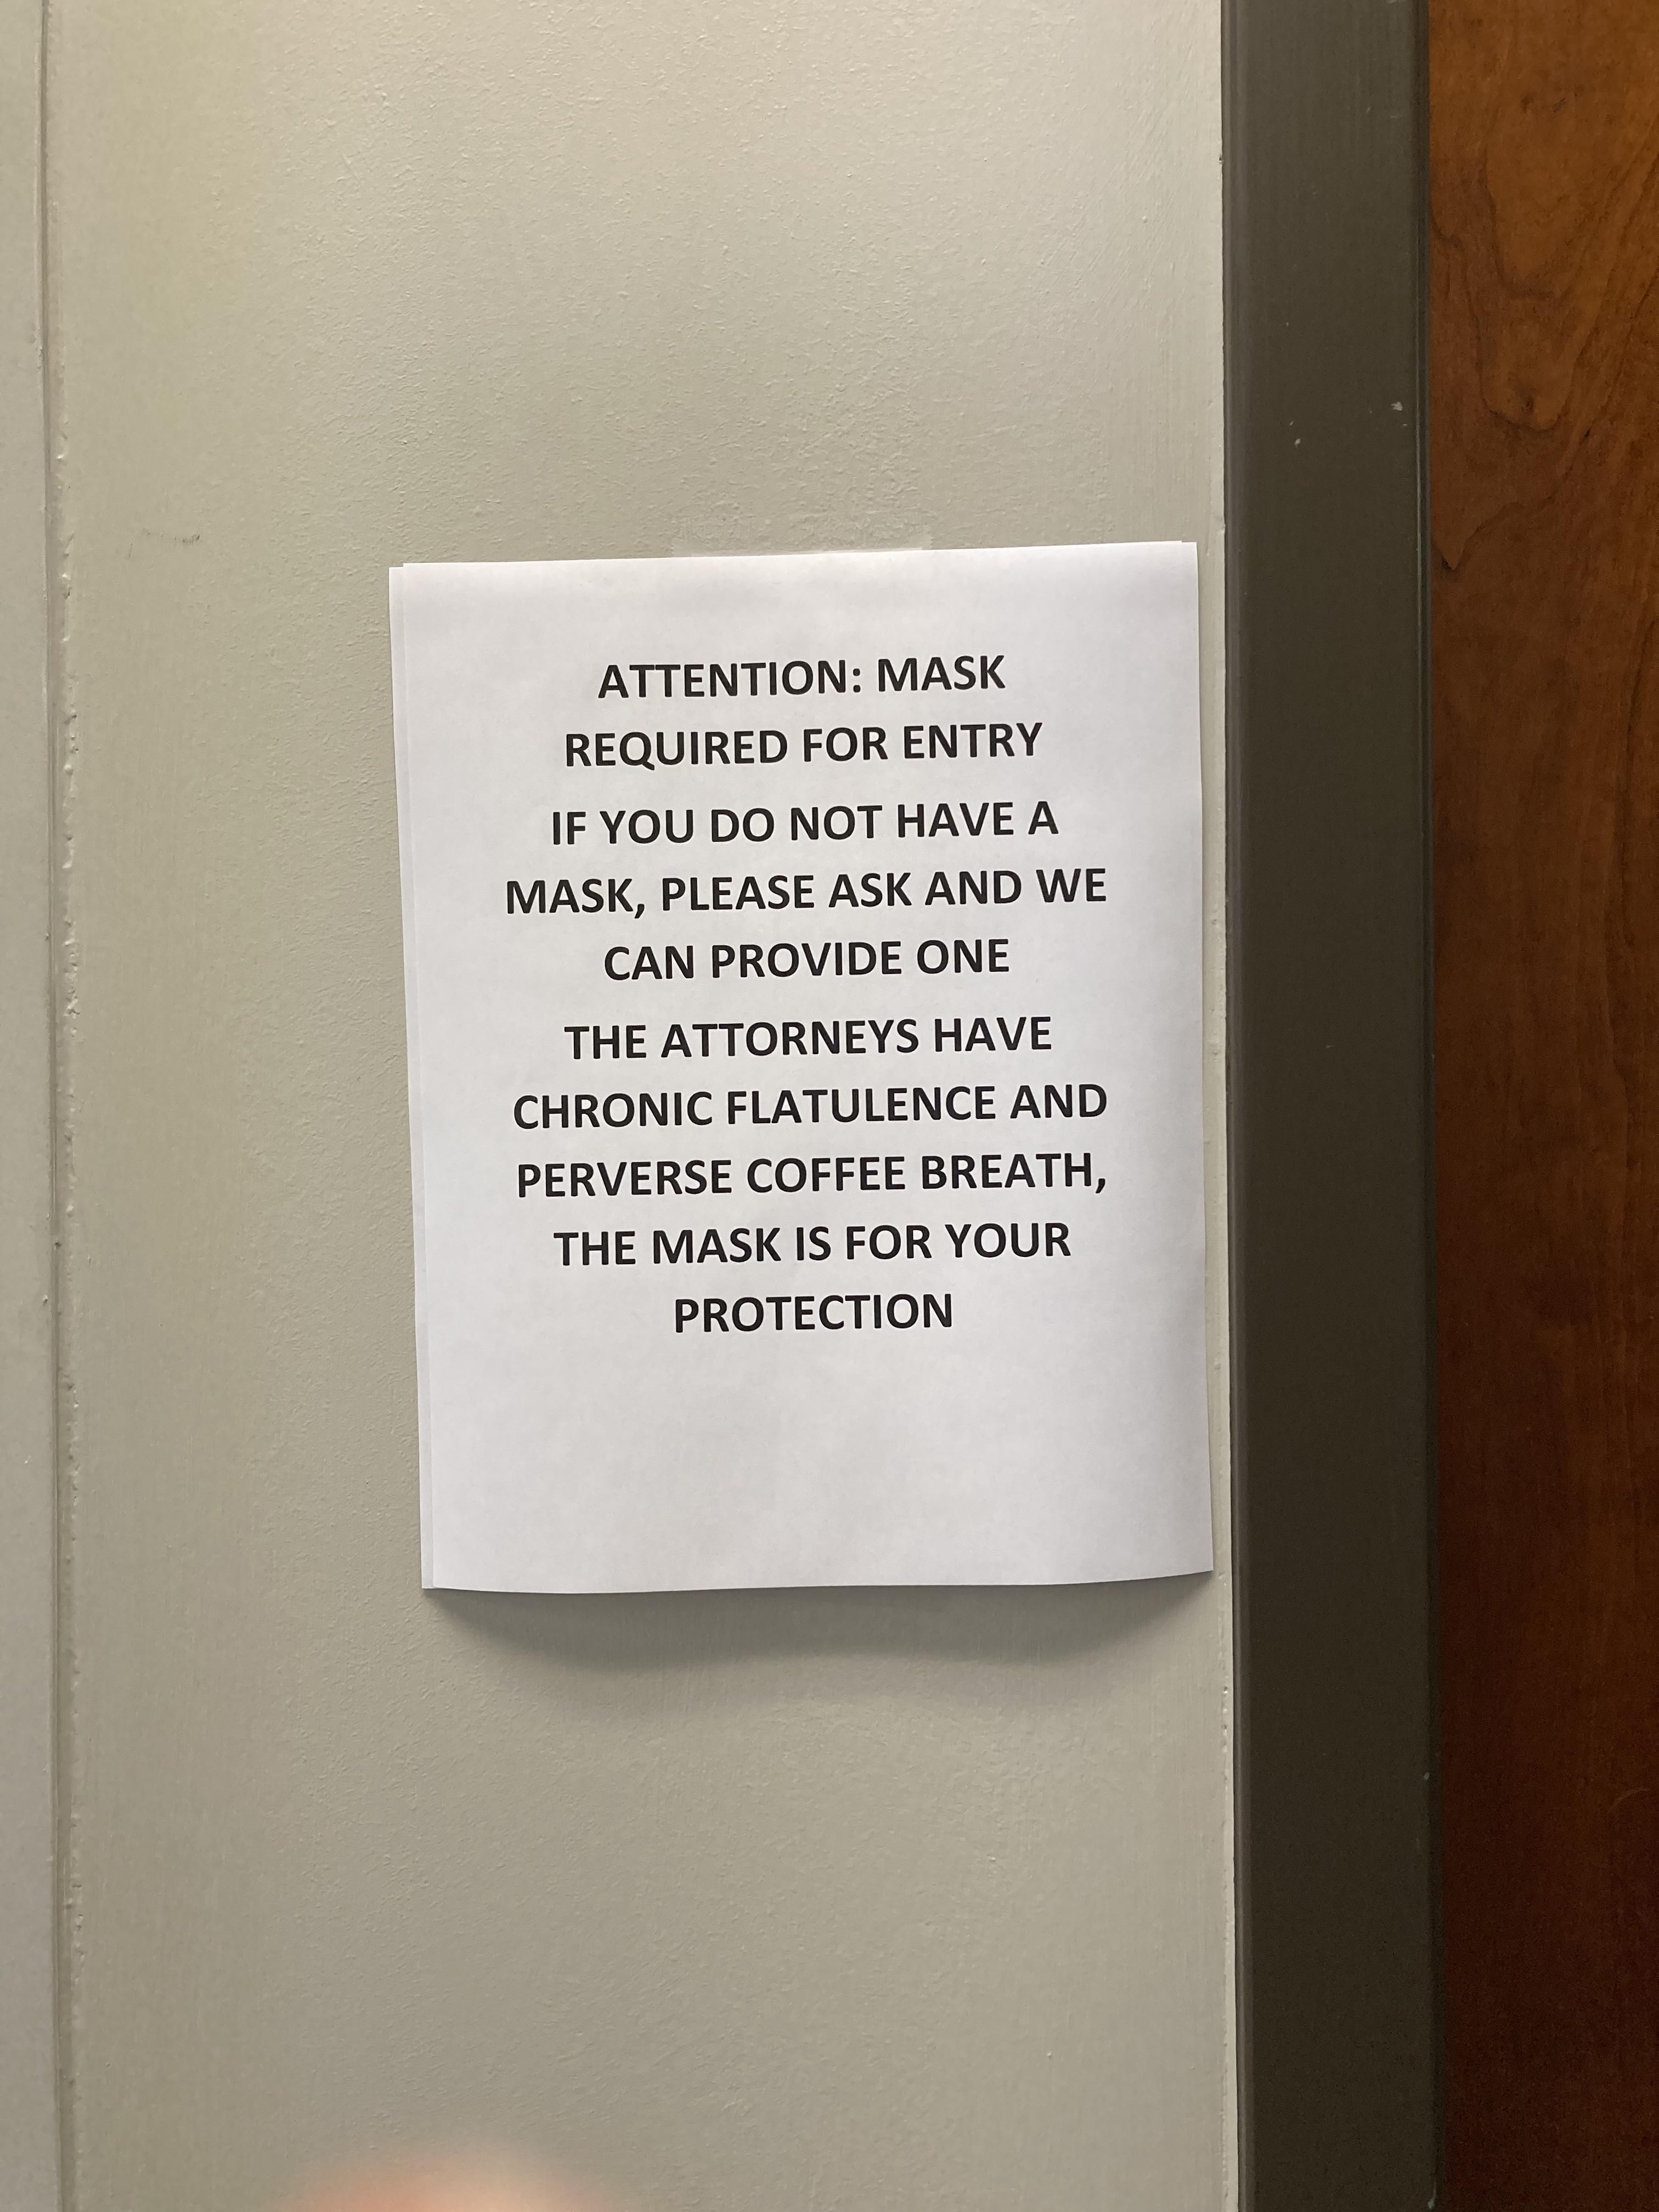 Seen at the local lawyers' office